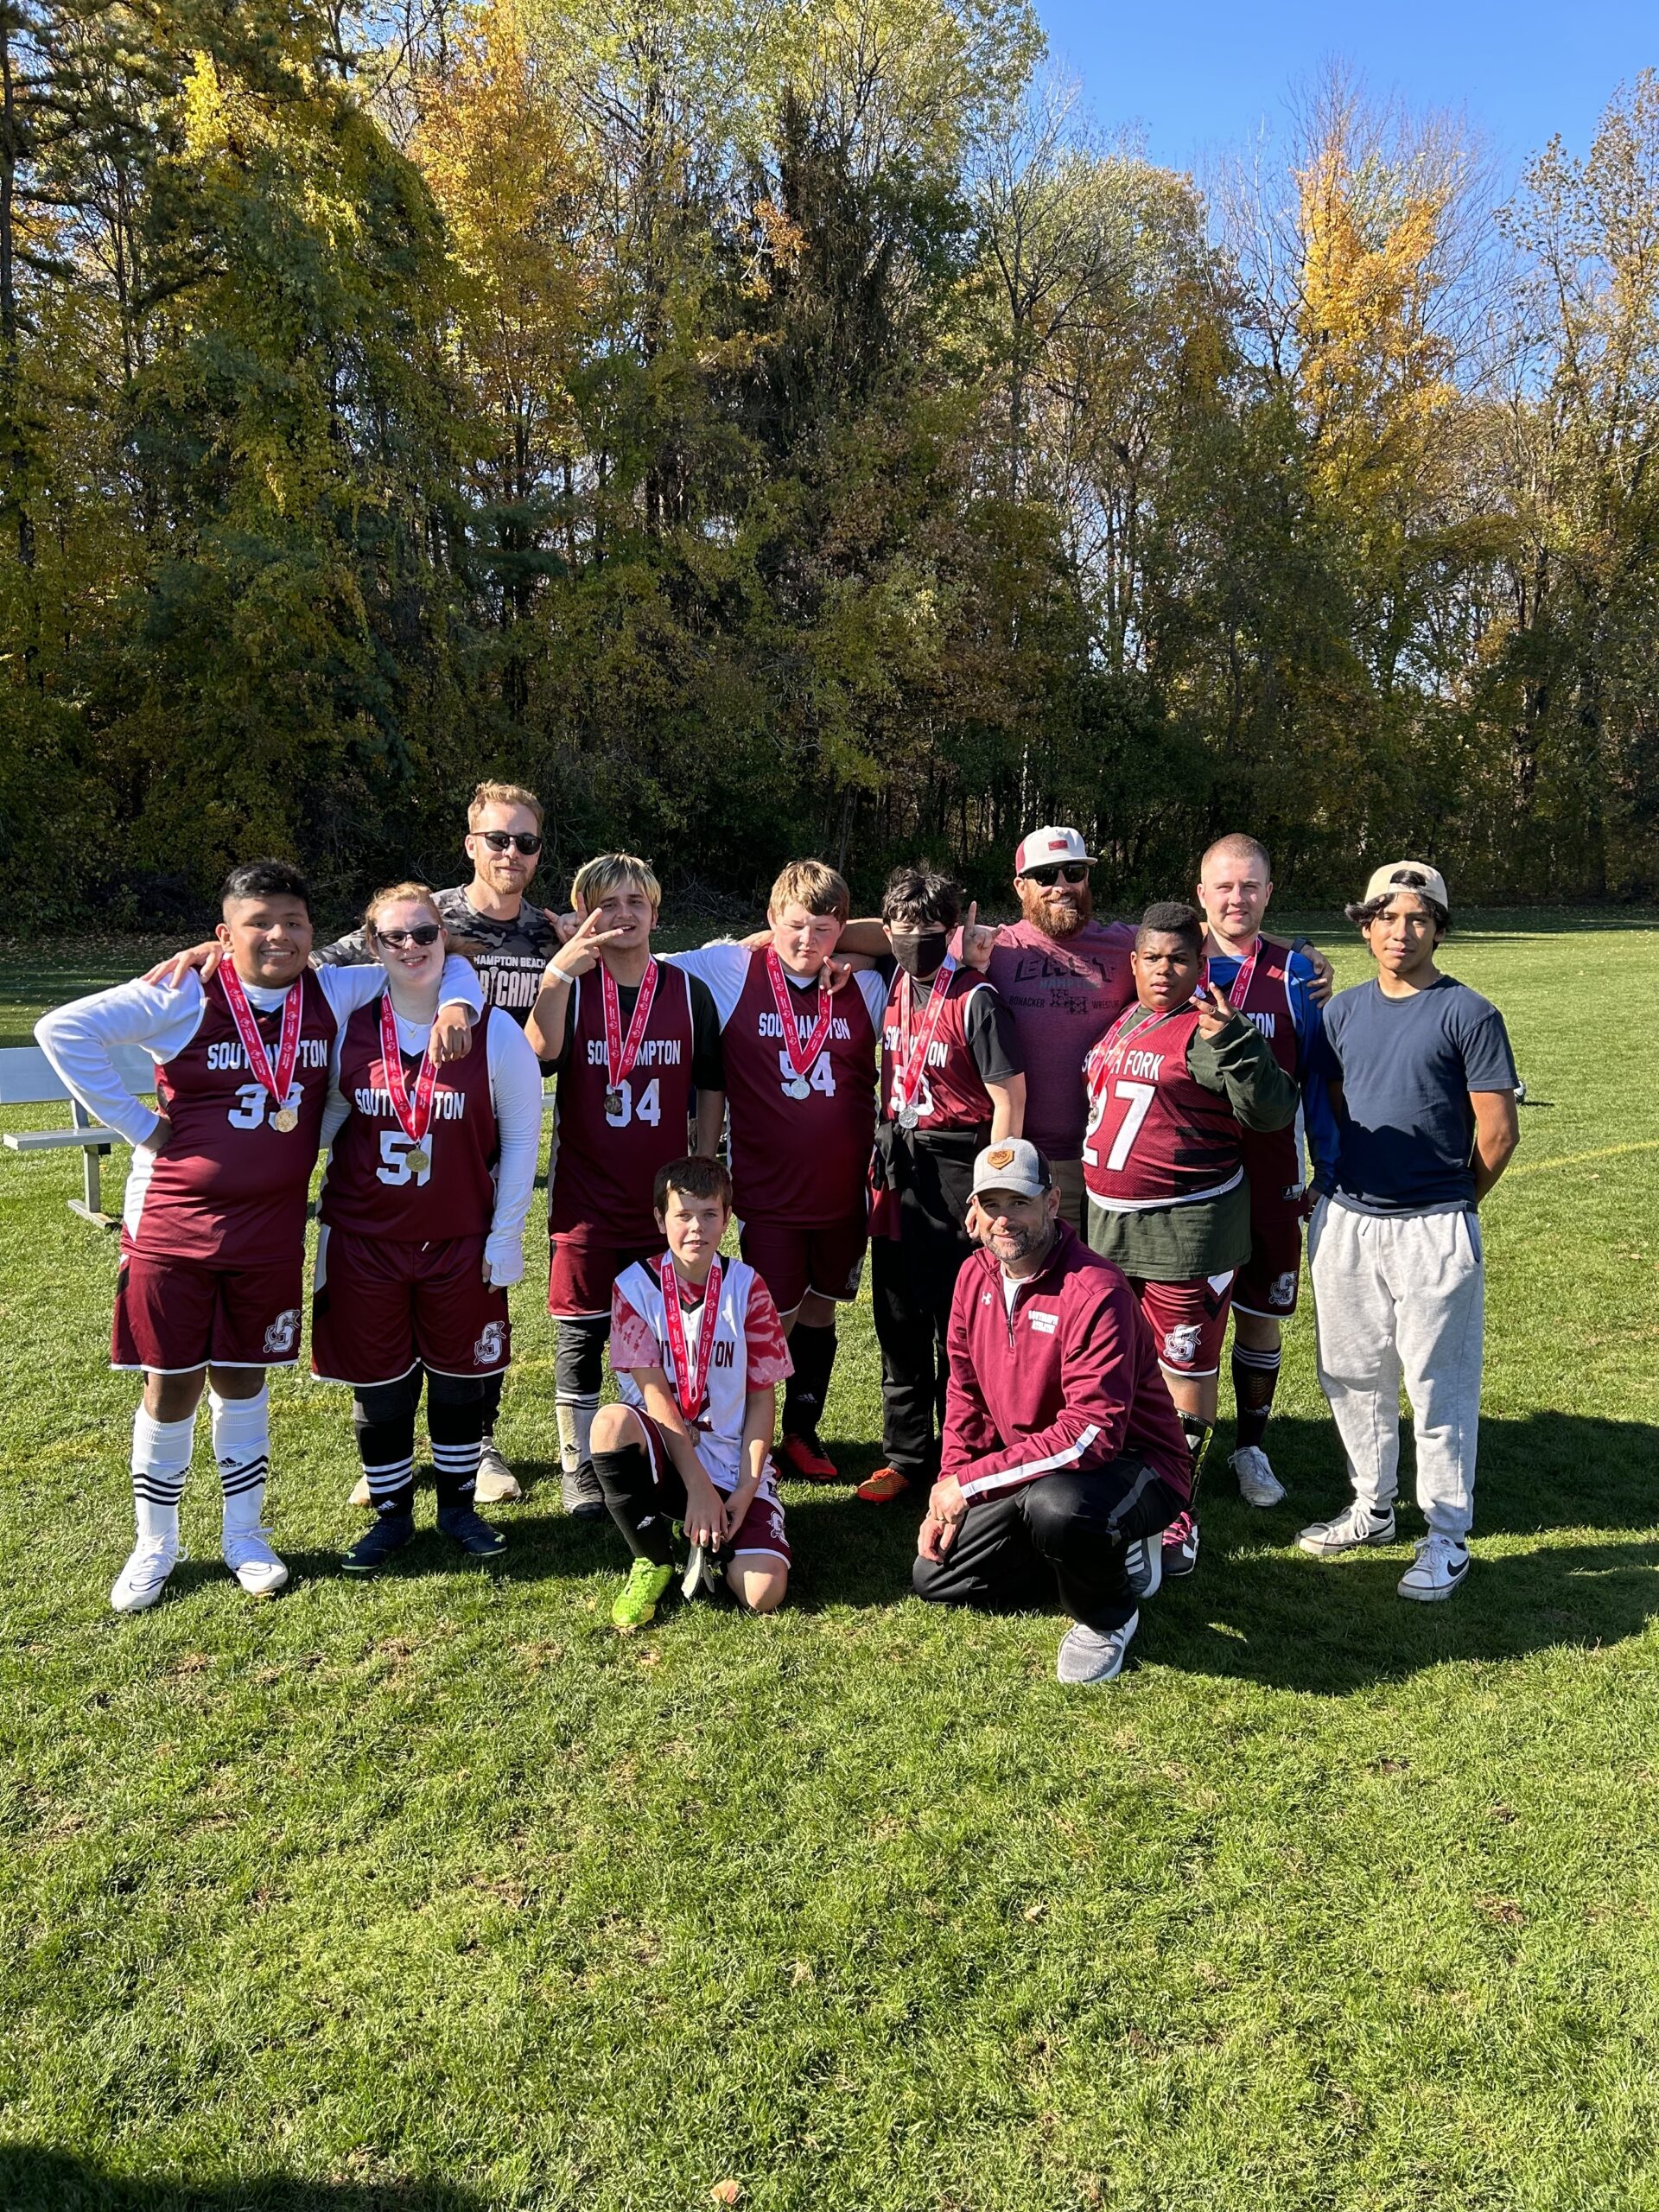 Southampton High School’s Special Olympics soccer team recently took second place in their division at a match in Glen Falls. COURTESY SOUTHAMPTON SCHOOL DISTRICT